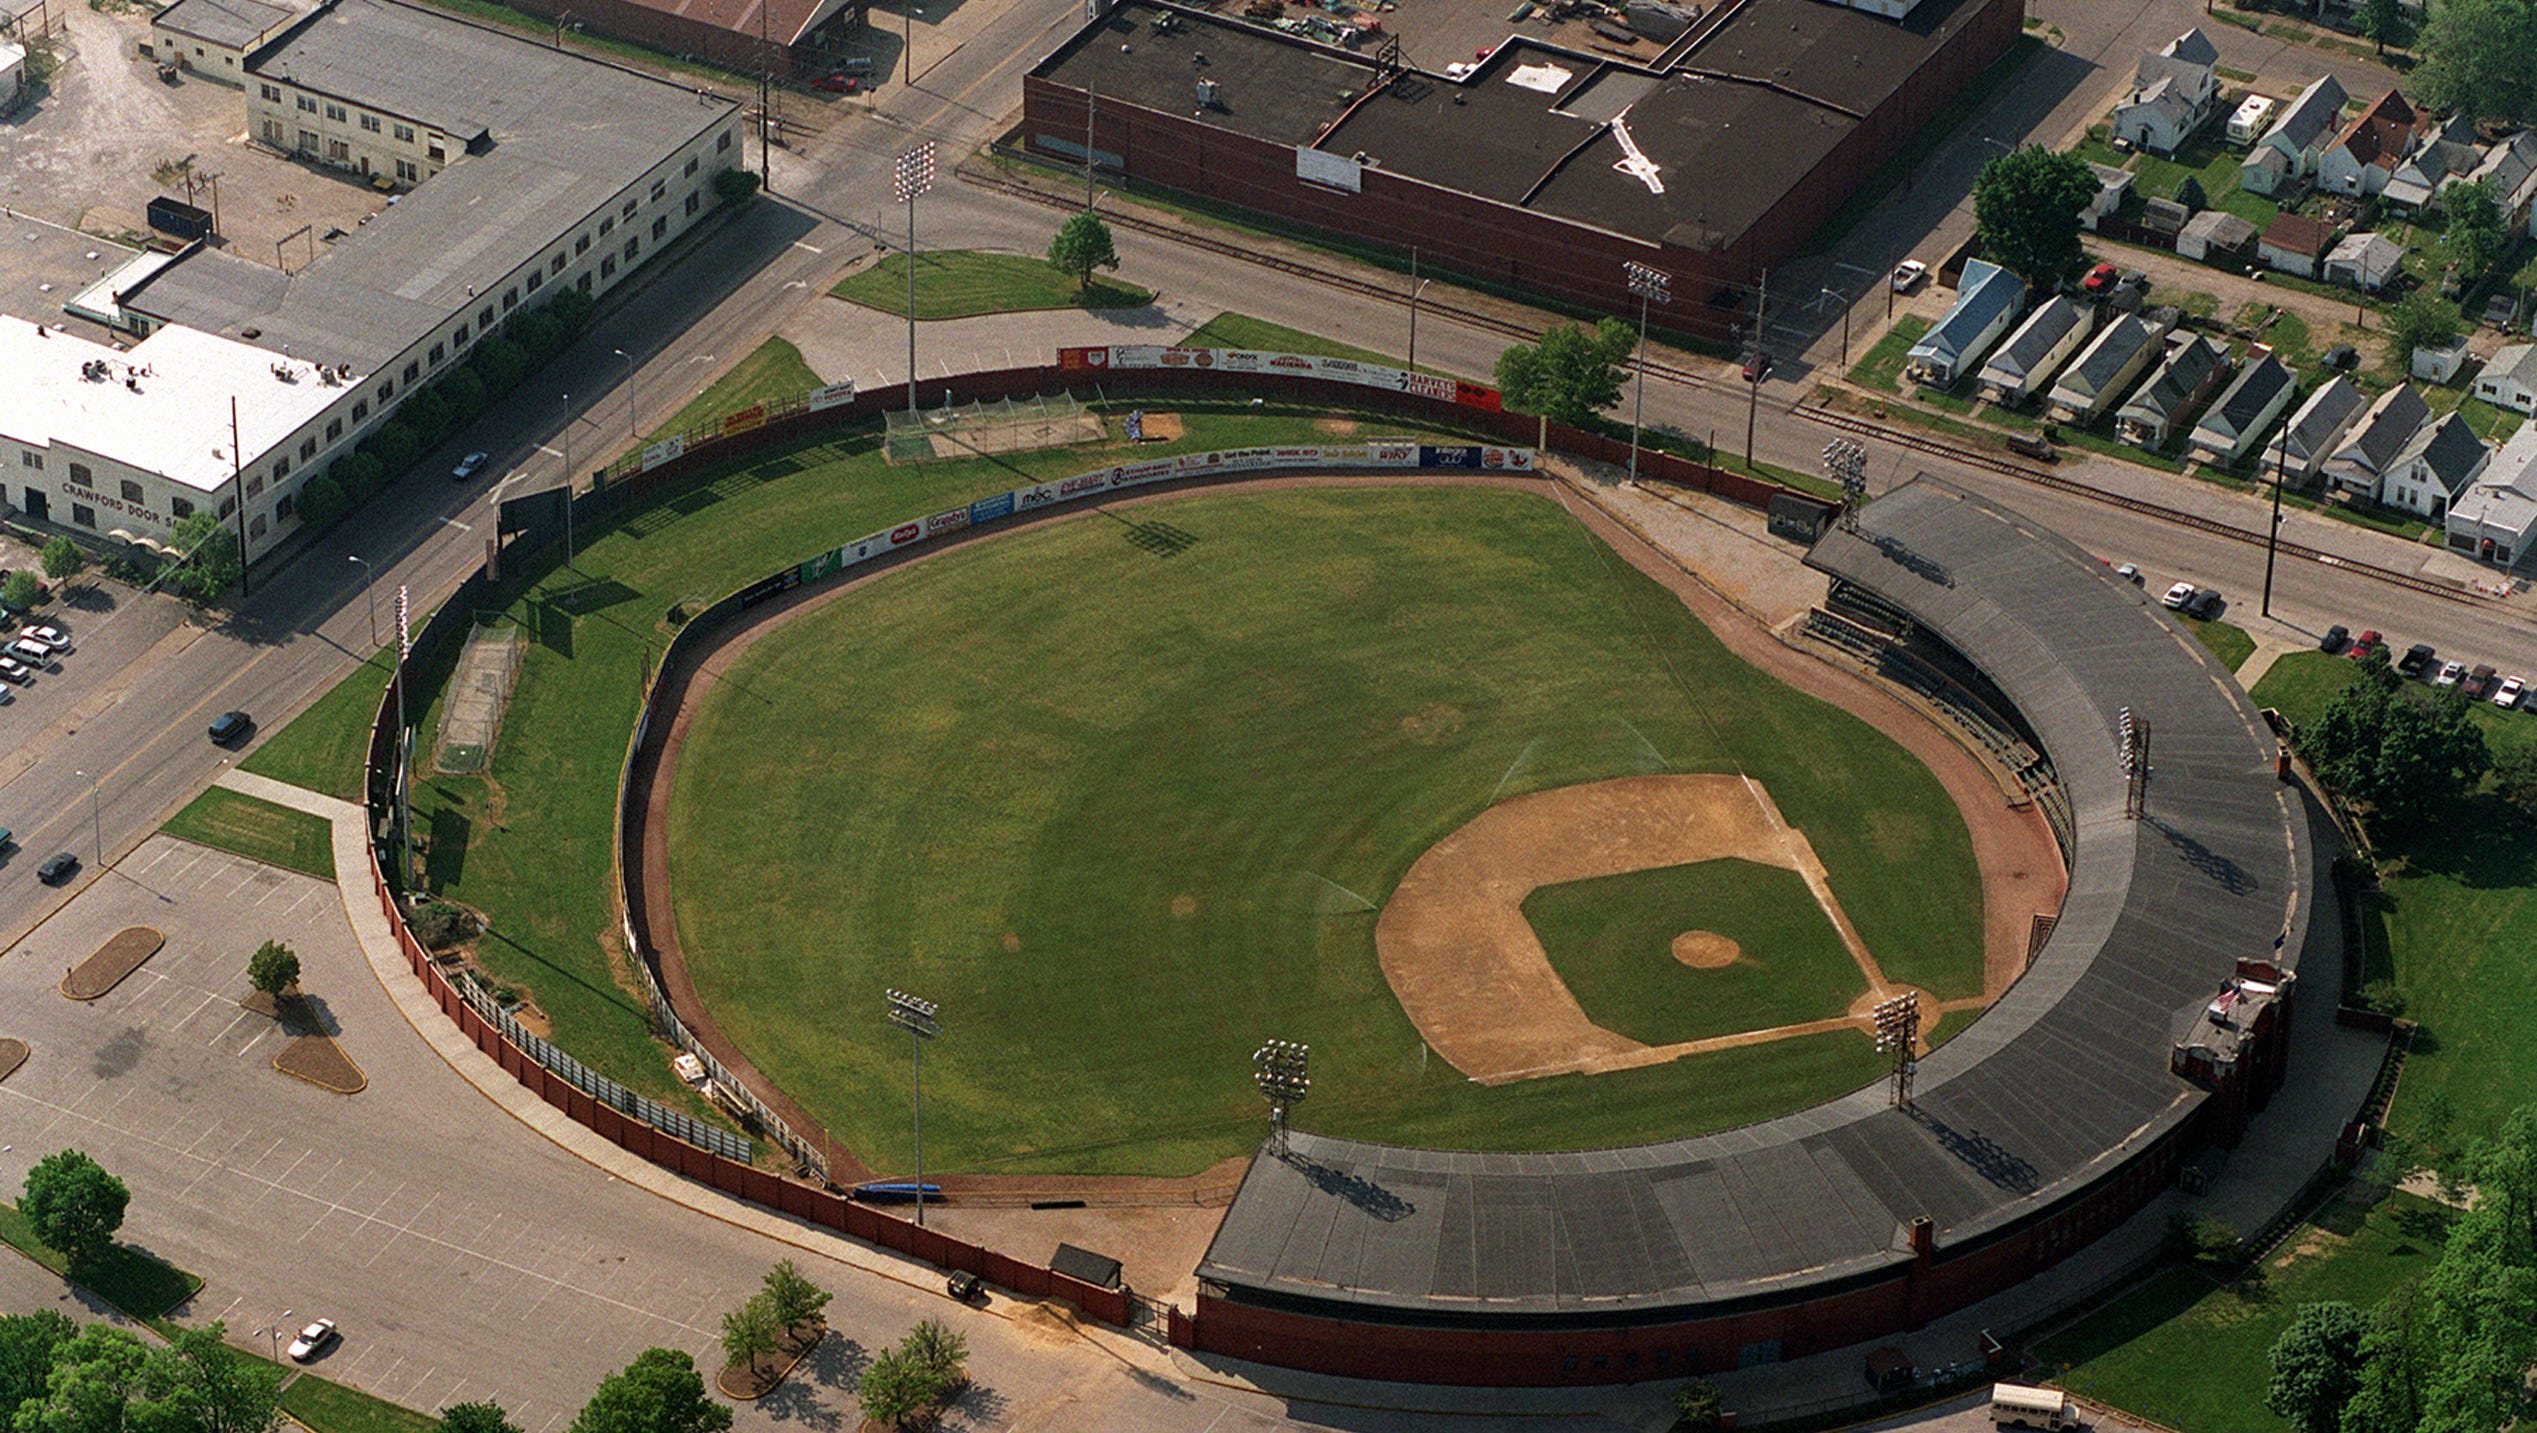 MLB considering a game Evansville's historic Bosse Field